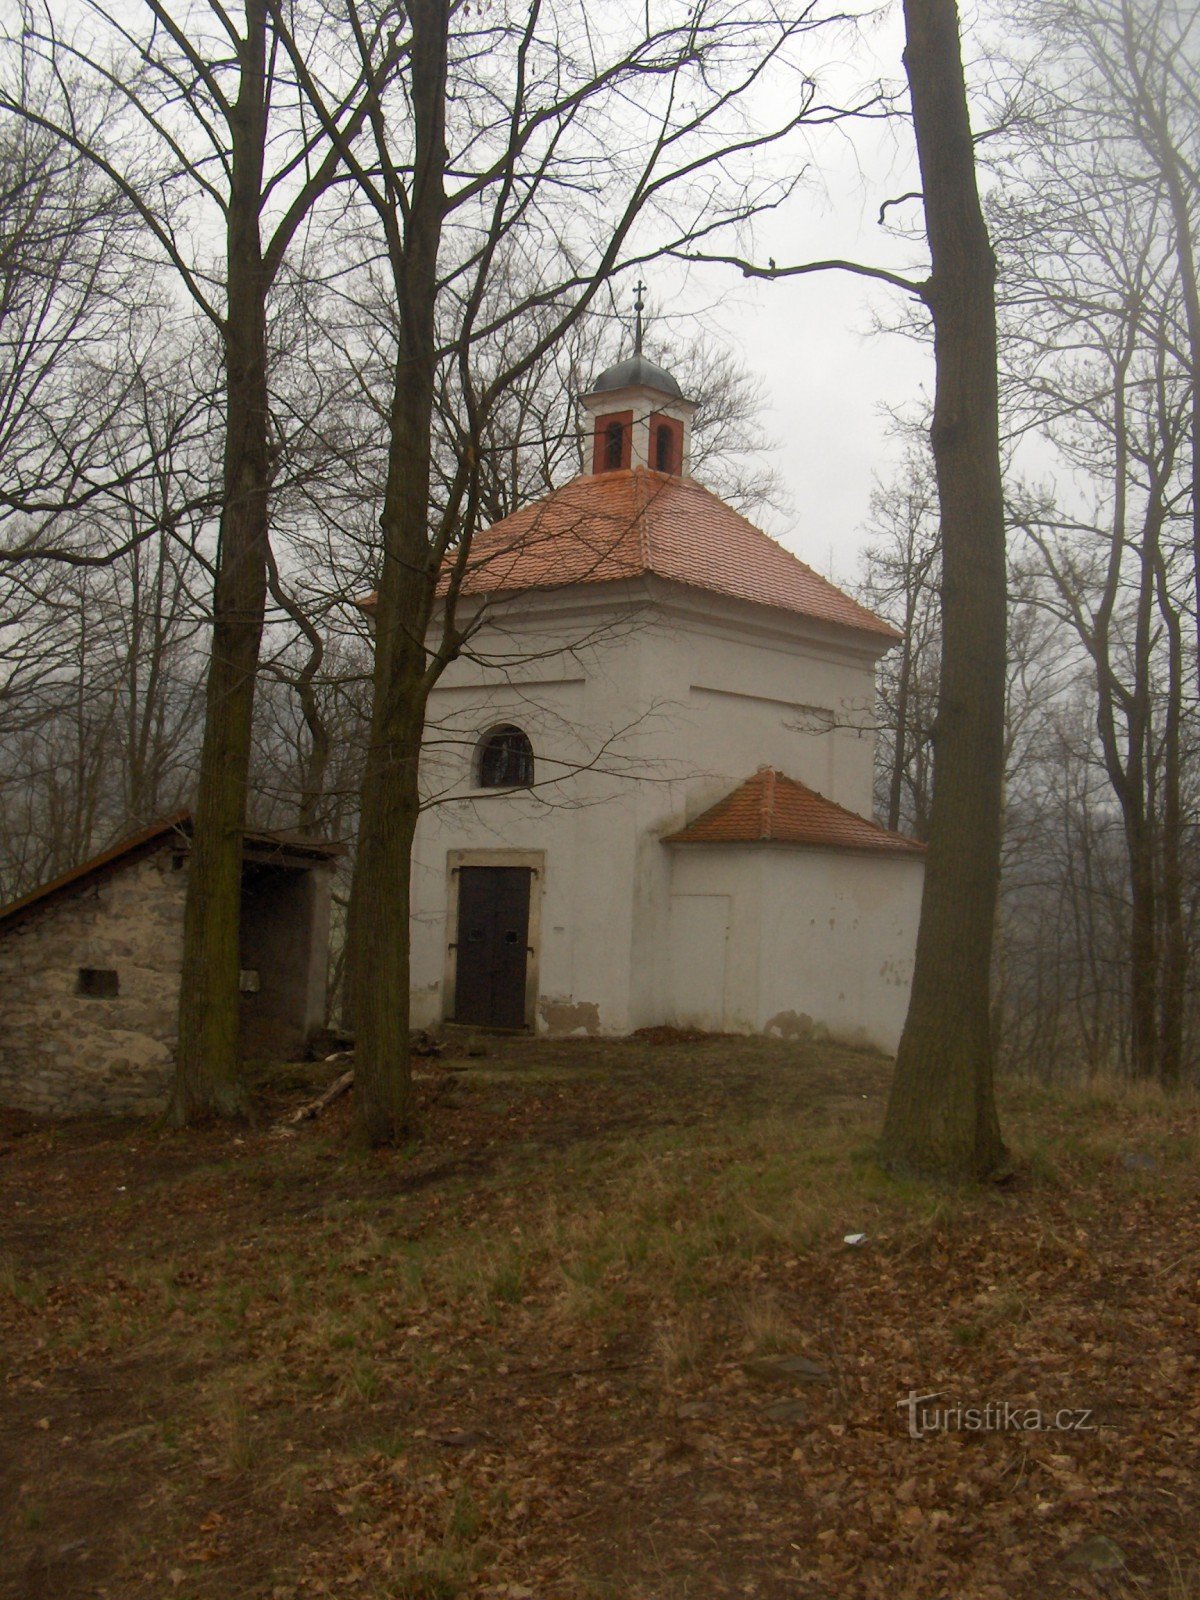 Chapel of St. Mary Magdalene.